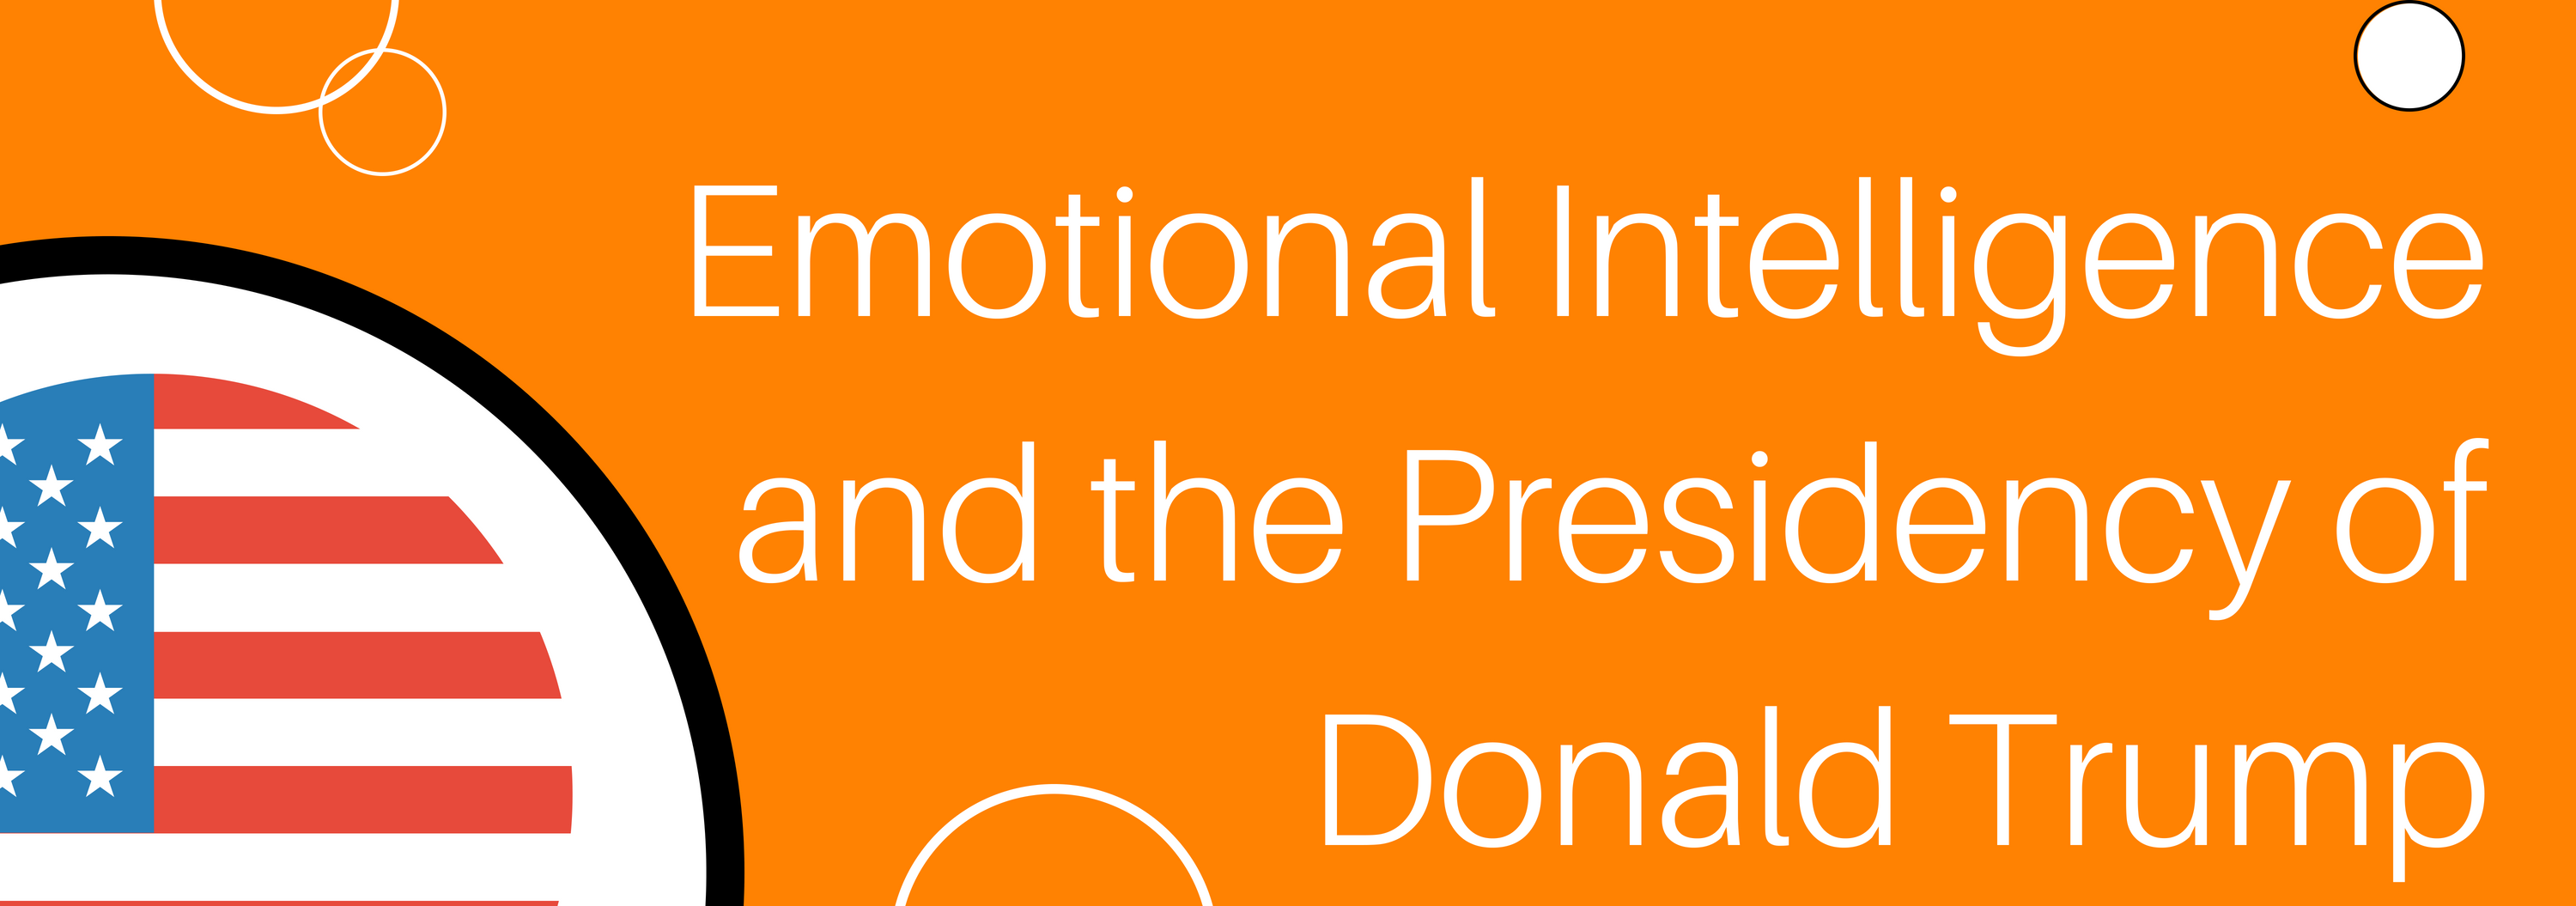 Emotional Intelligence and the Presidency of Donald Trump